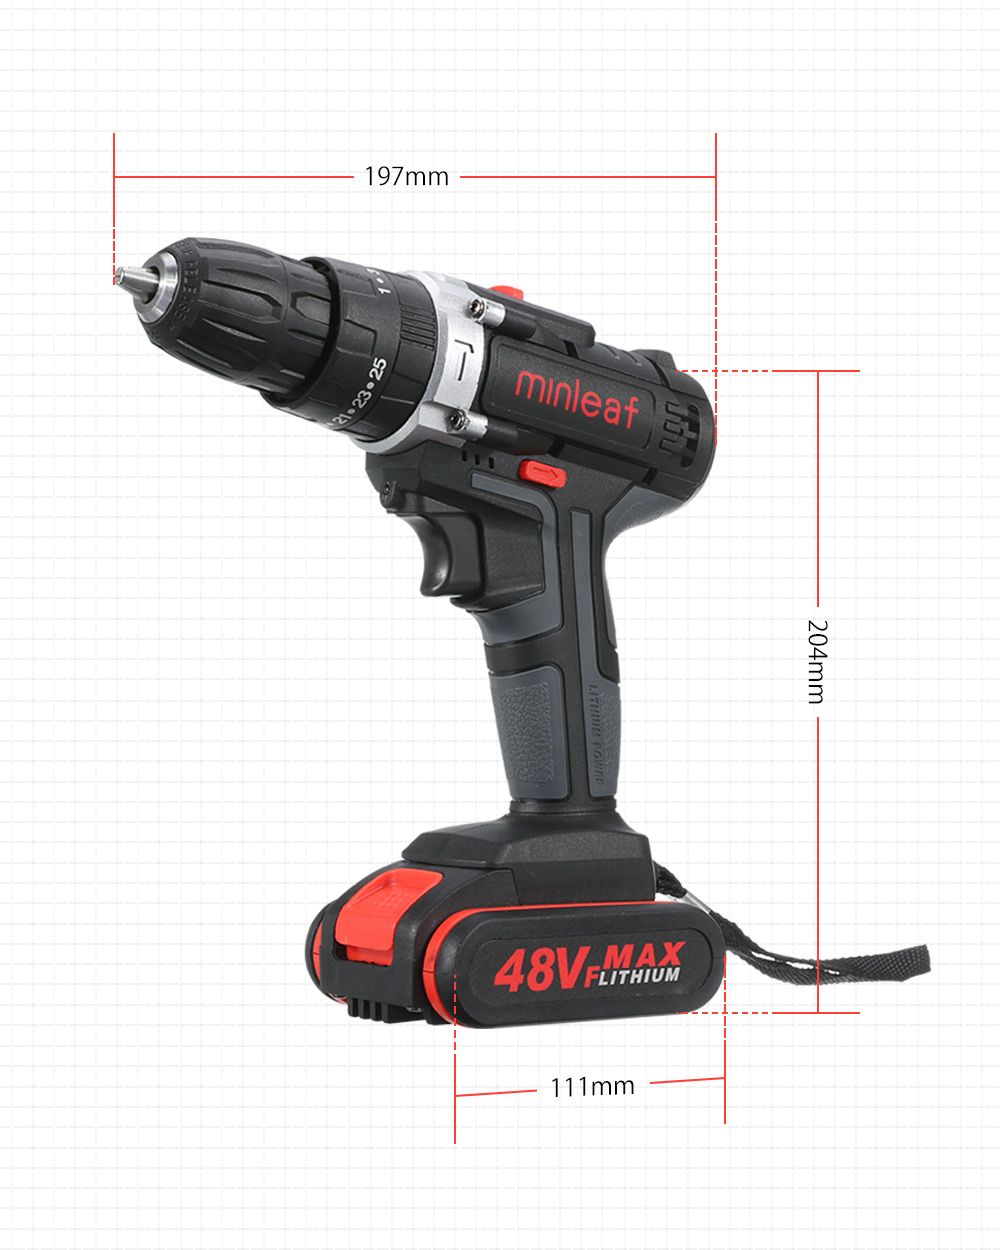 Minleaf-ML-ED1-48VF-Cordless-Electric-Impact-Drill-Rechargeable-Drill-Screwdriver-W-2pc-Li-ion-Batte-1765960